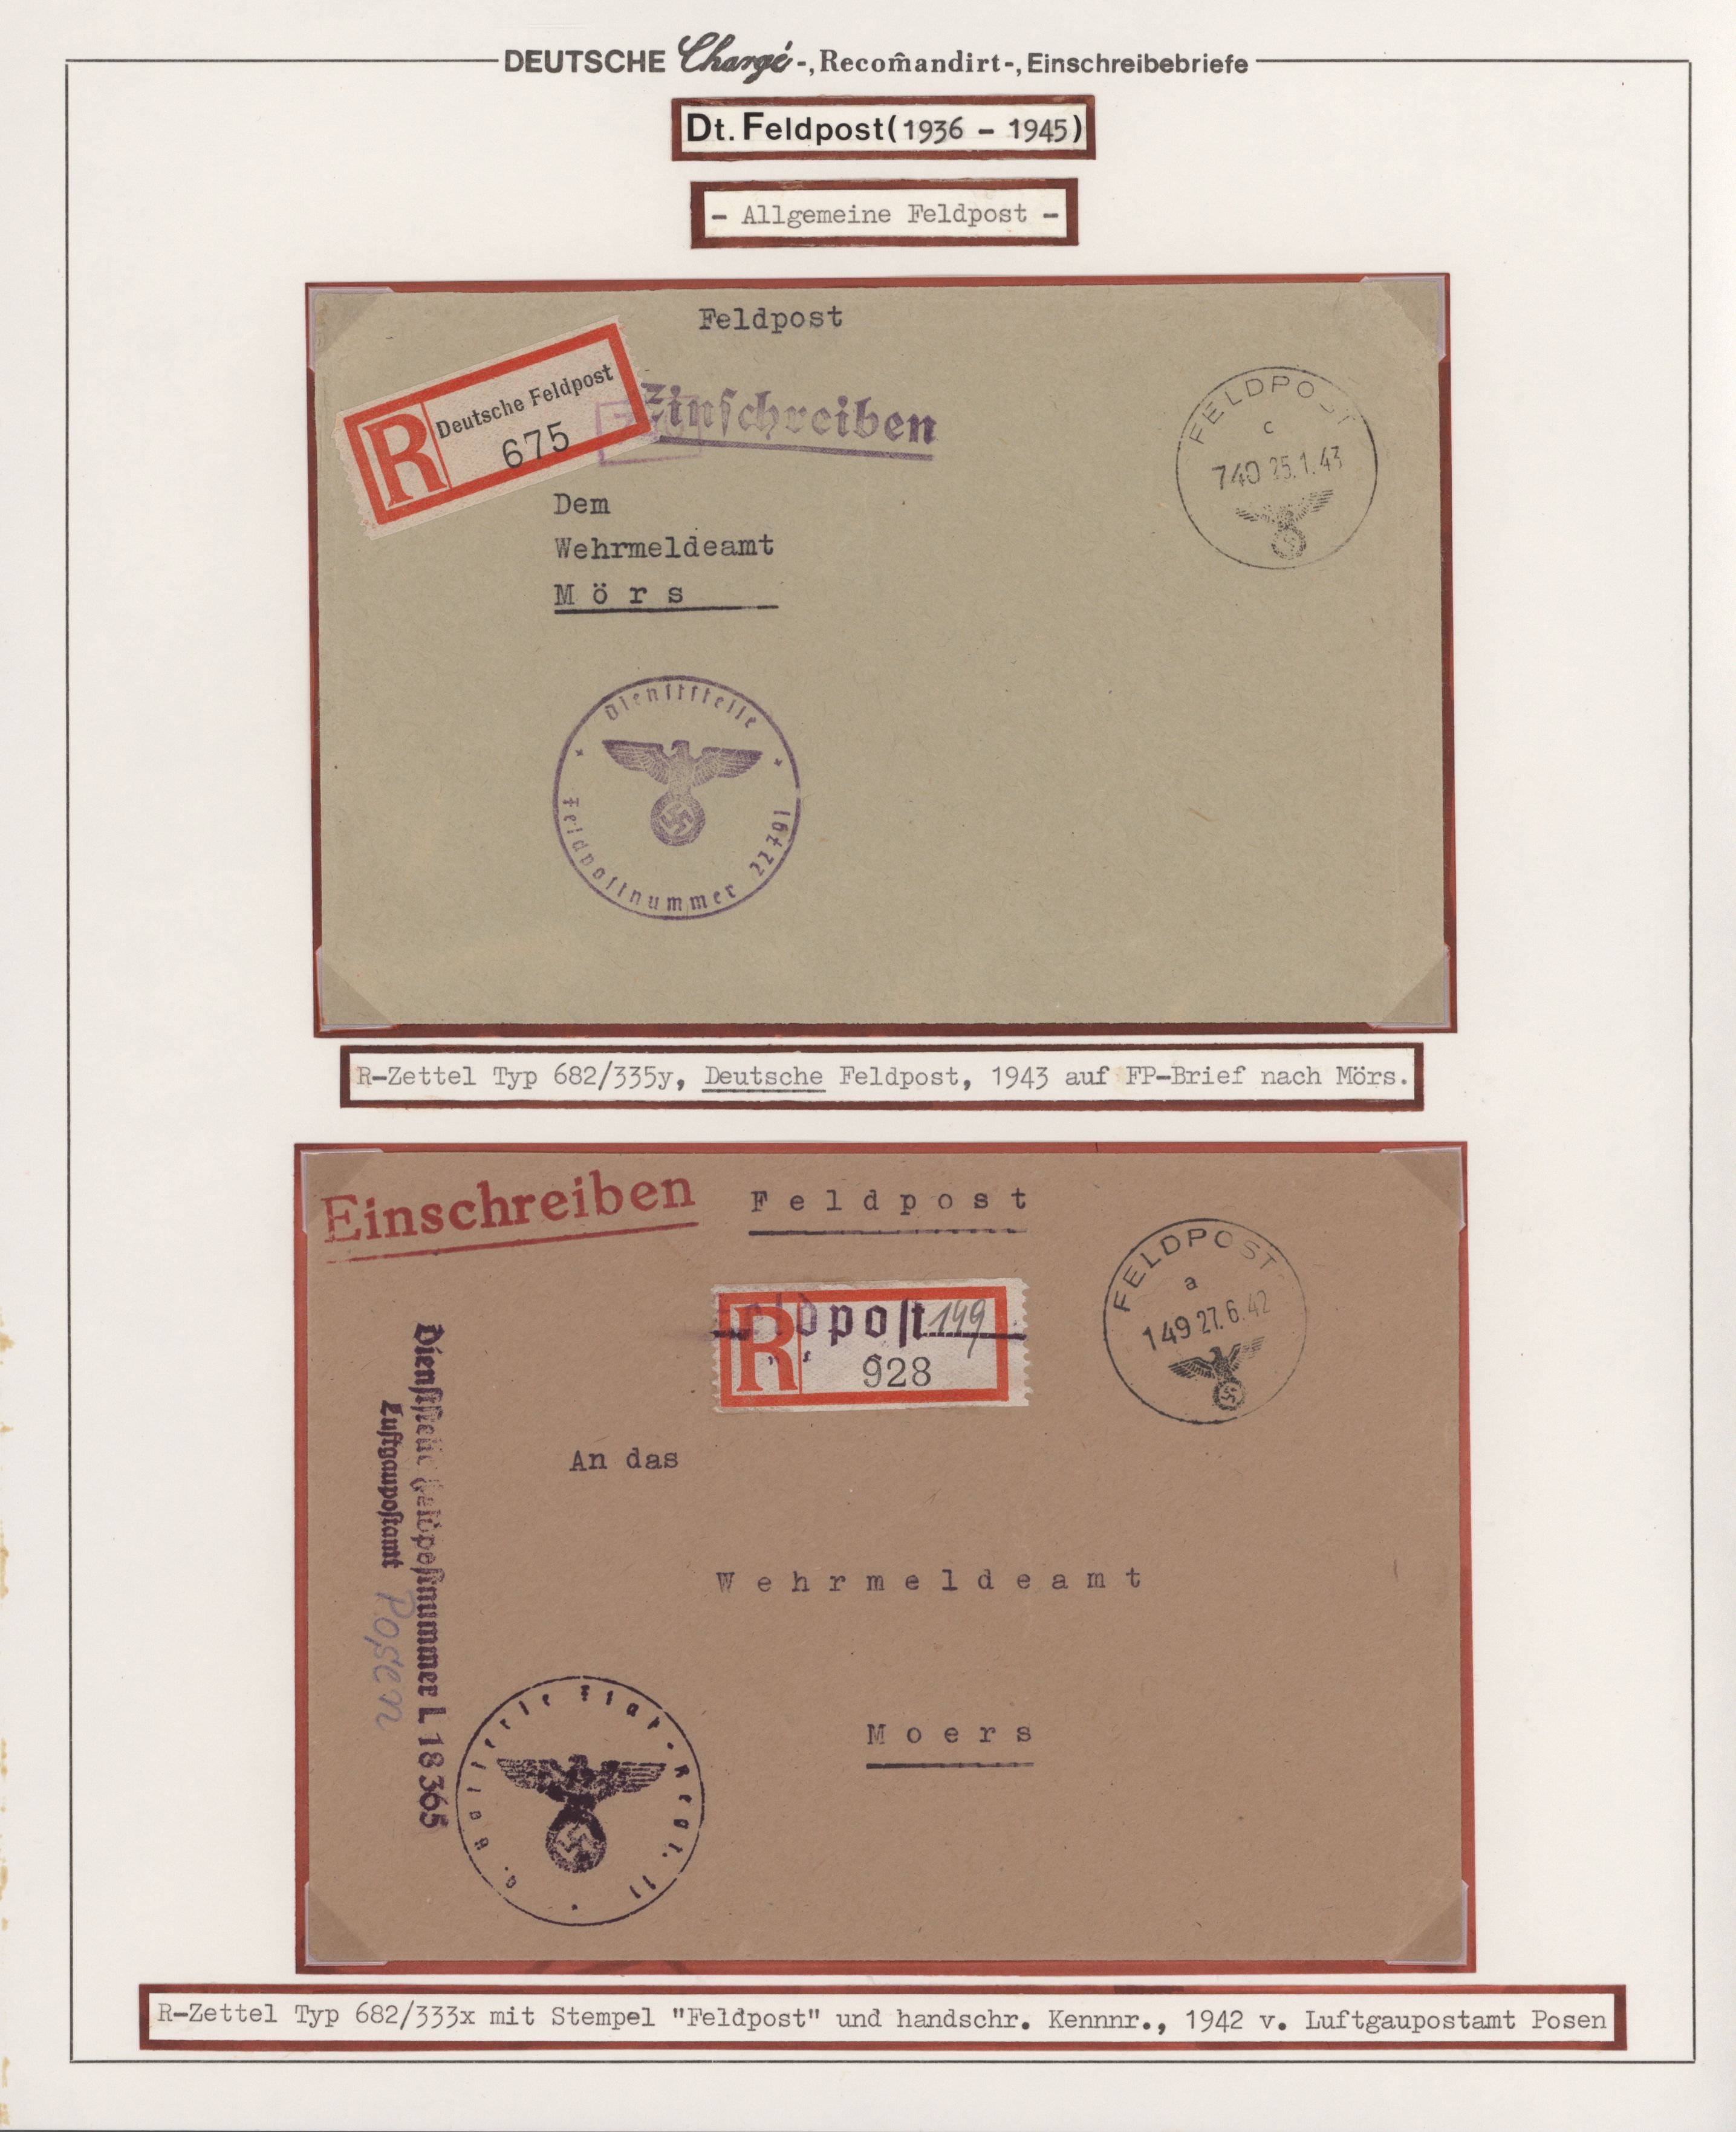 Stamp Auction - feldpost 1. weltkrieg - Sale #47 Colections: Germany ...